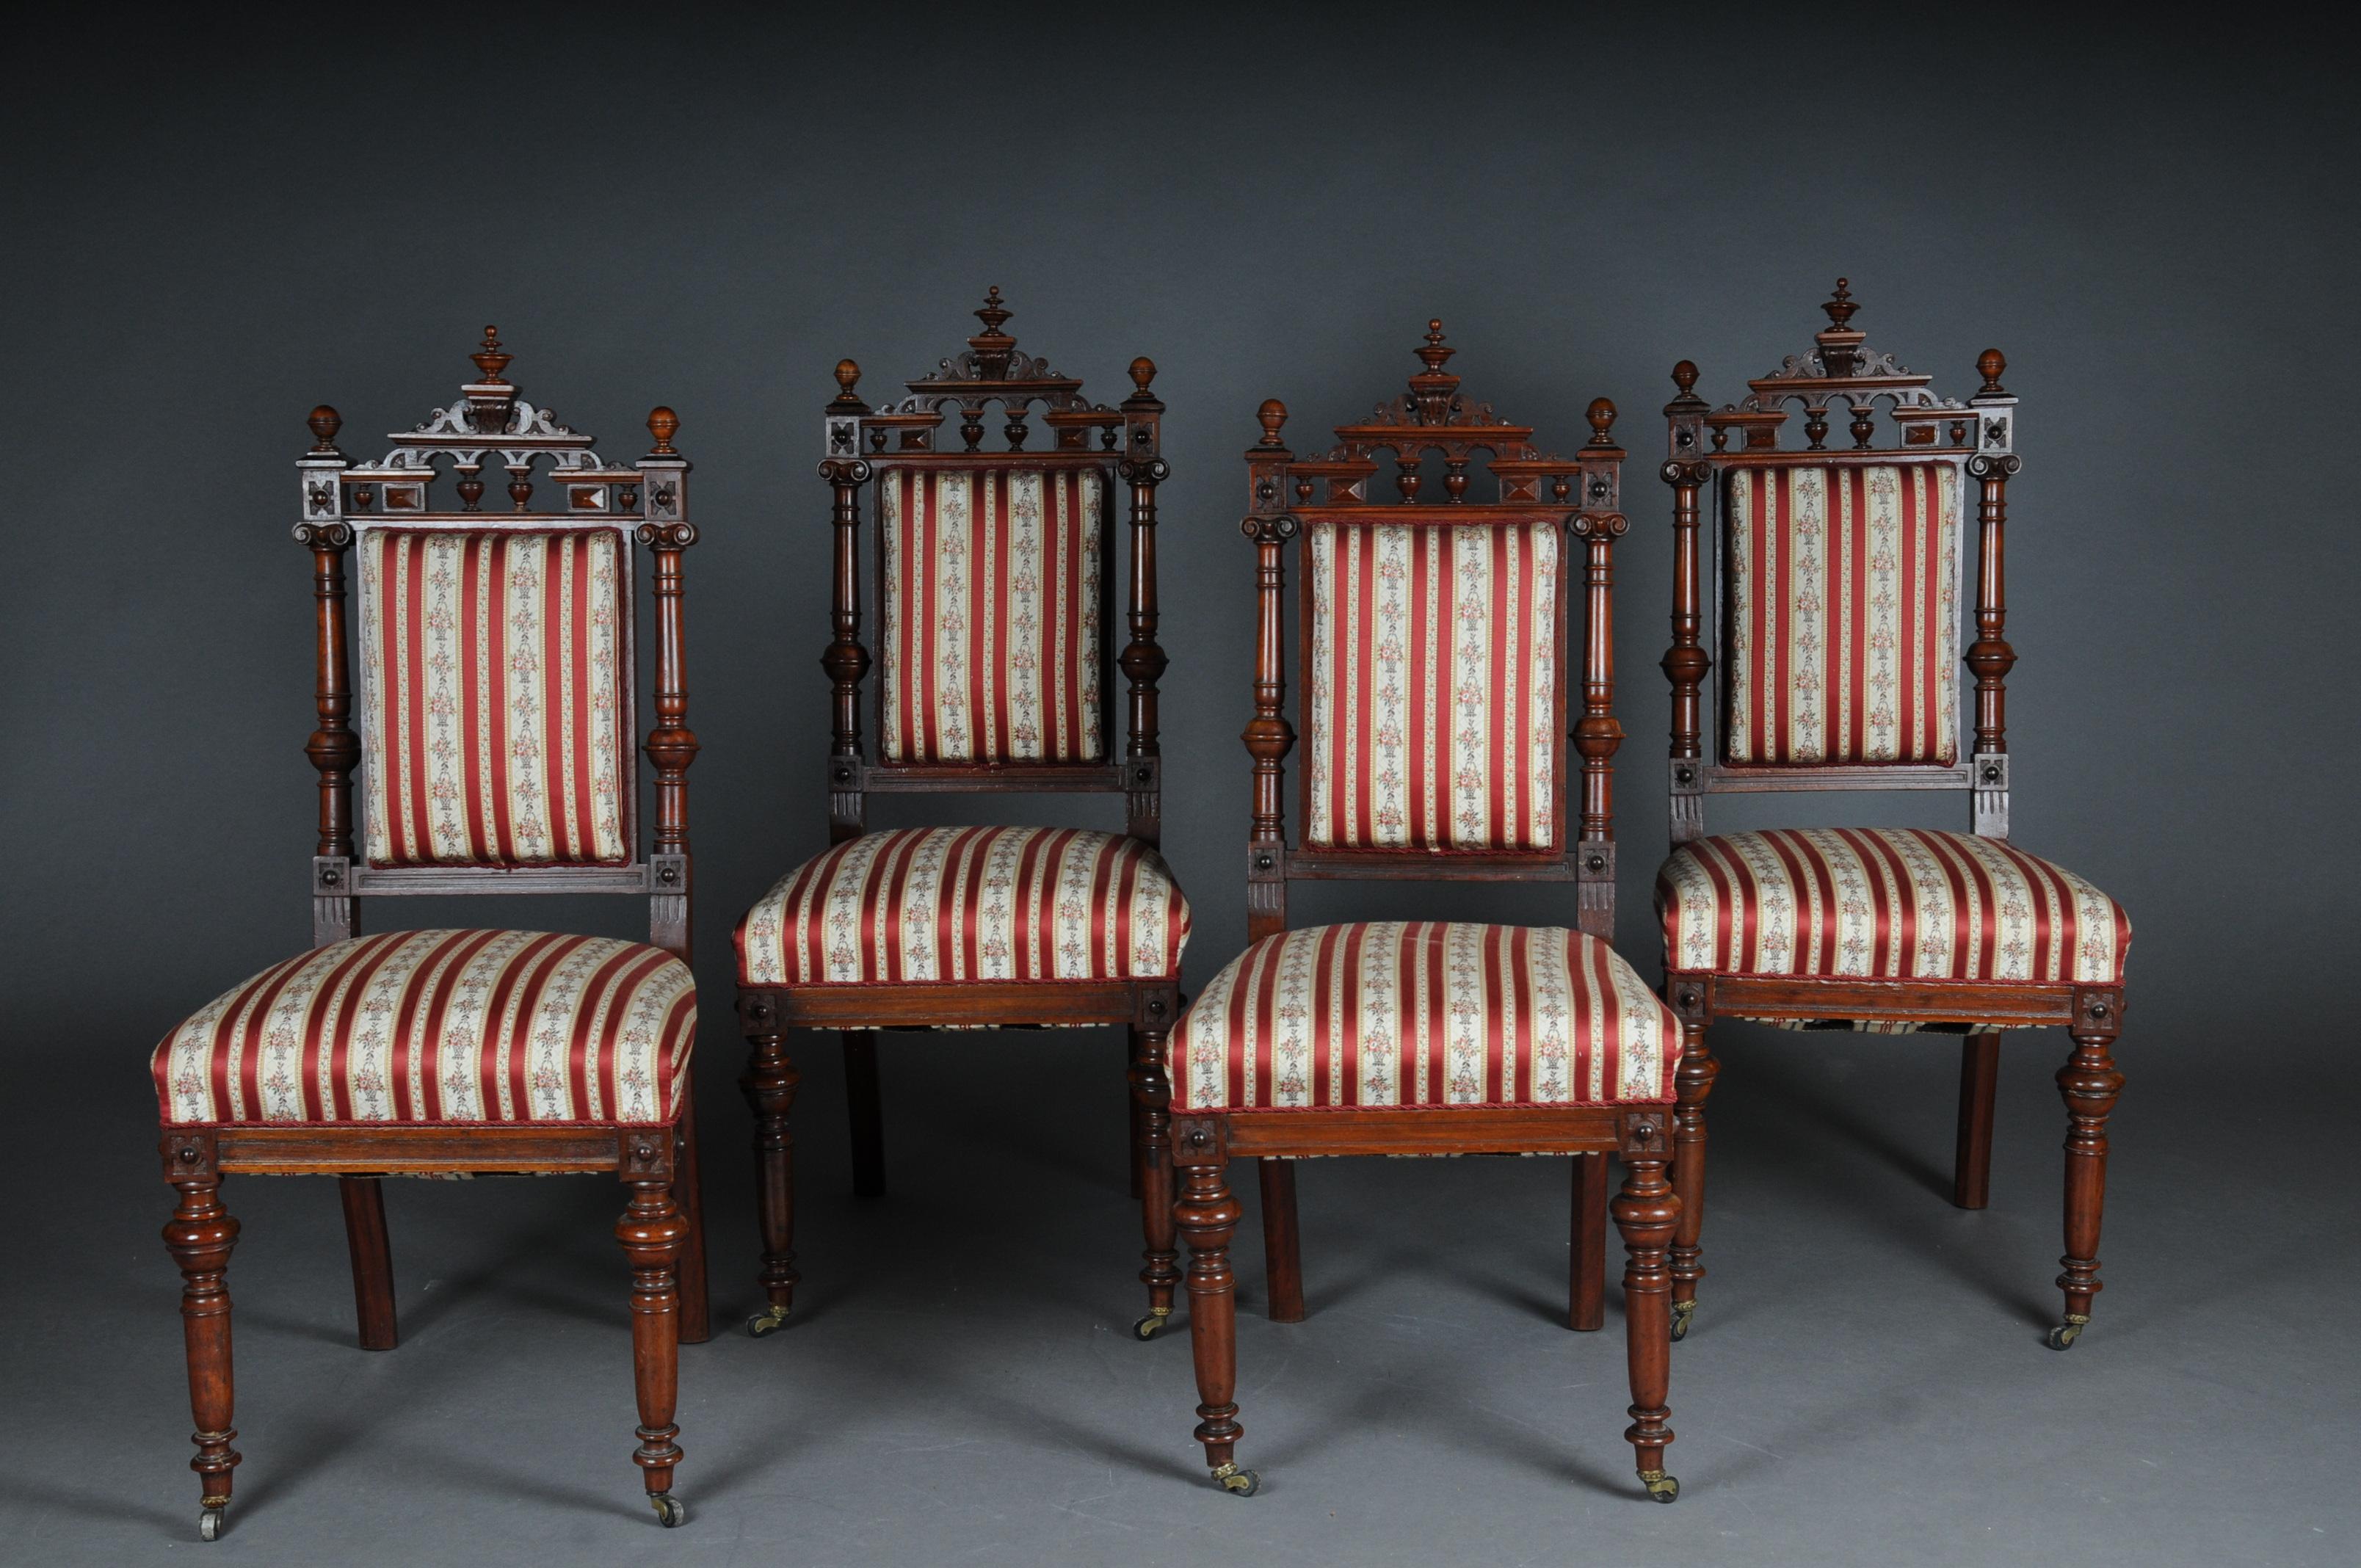 Historicism Salon Sofa, 2 Armchairs, 4 Chairs circa 1870, Walnut In Good Condition For Sale In Berlin, DE